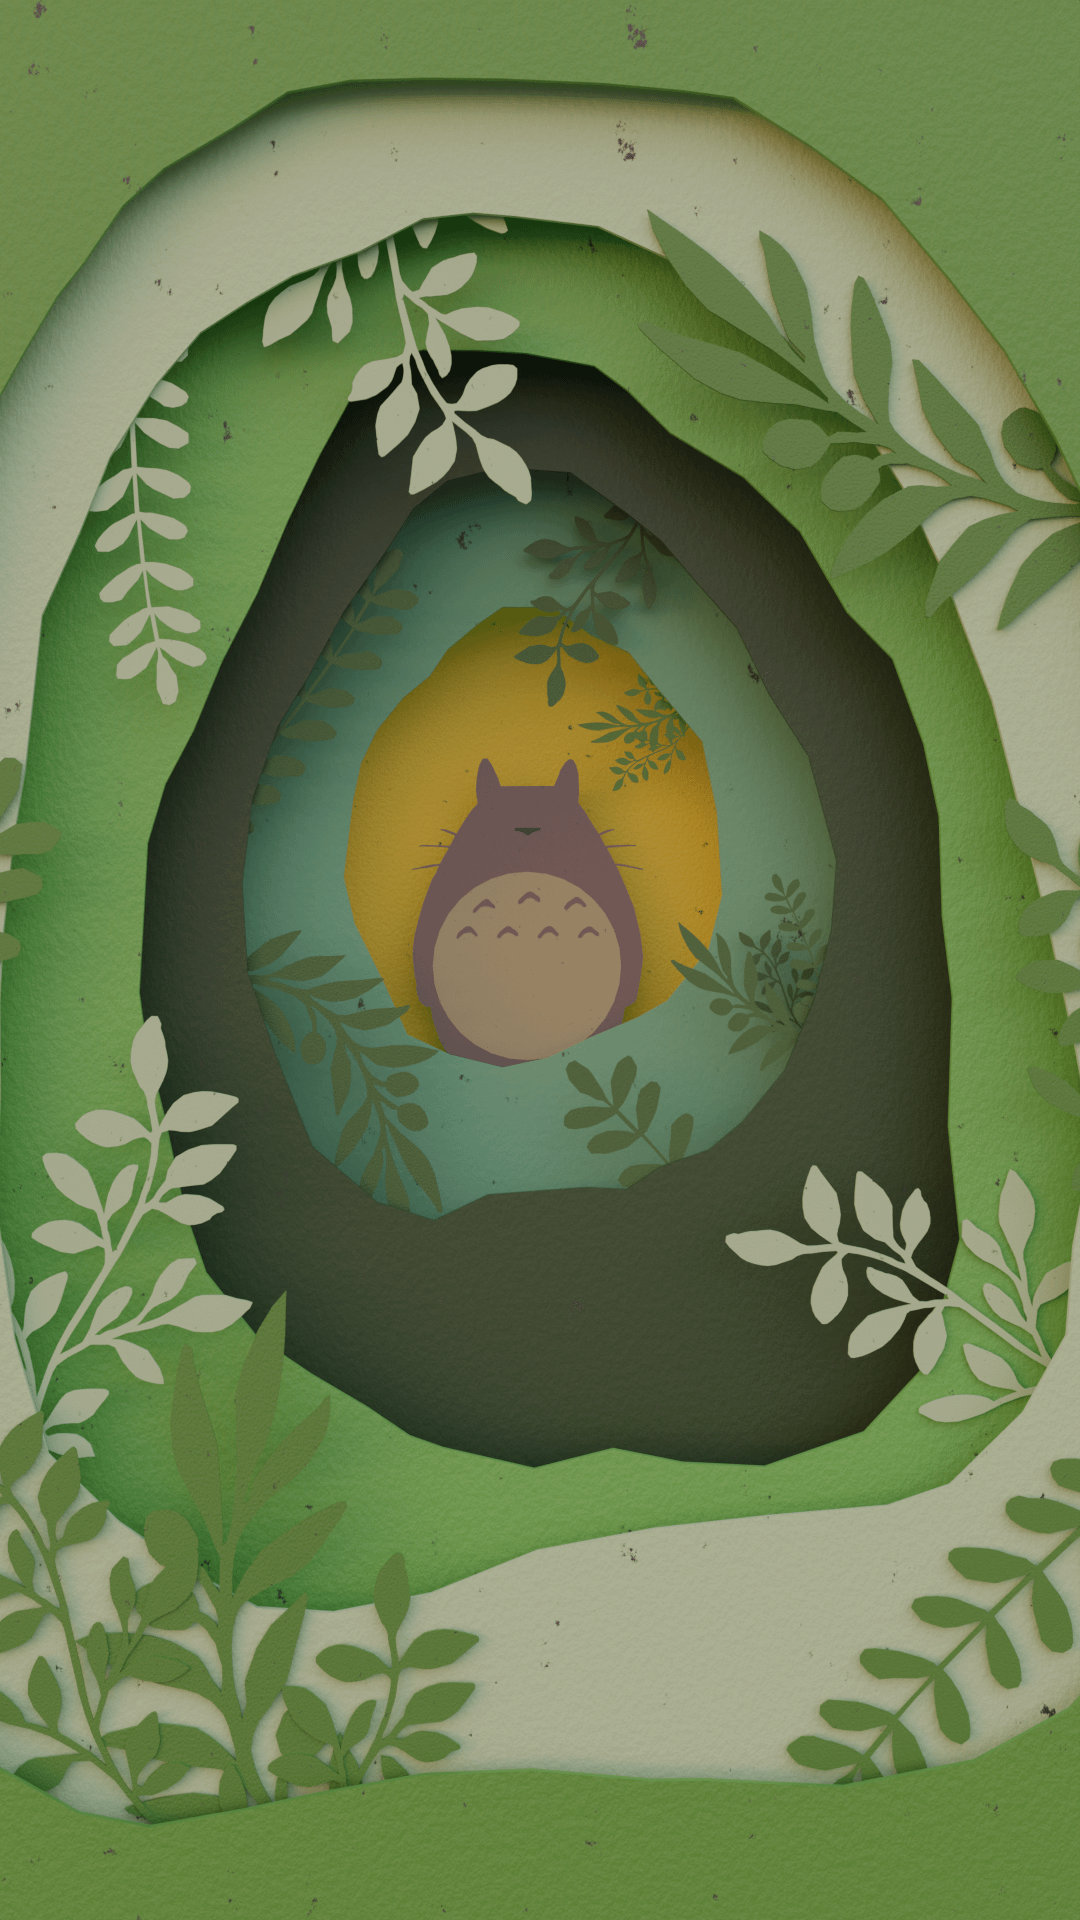 Paper cut art of a green forest with a sleeping Totoro in the center - My Neighbor Totoro